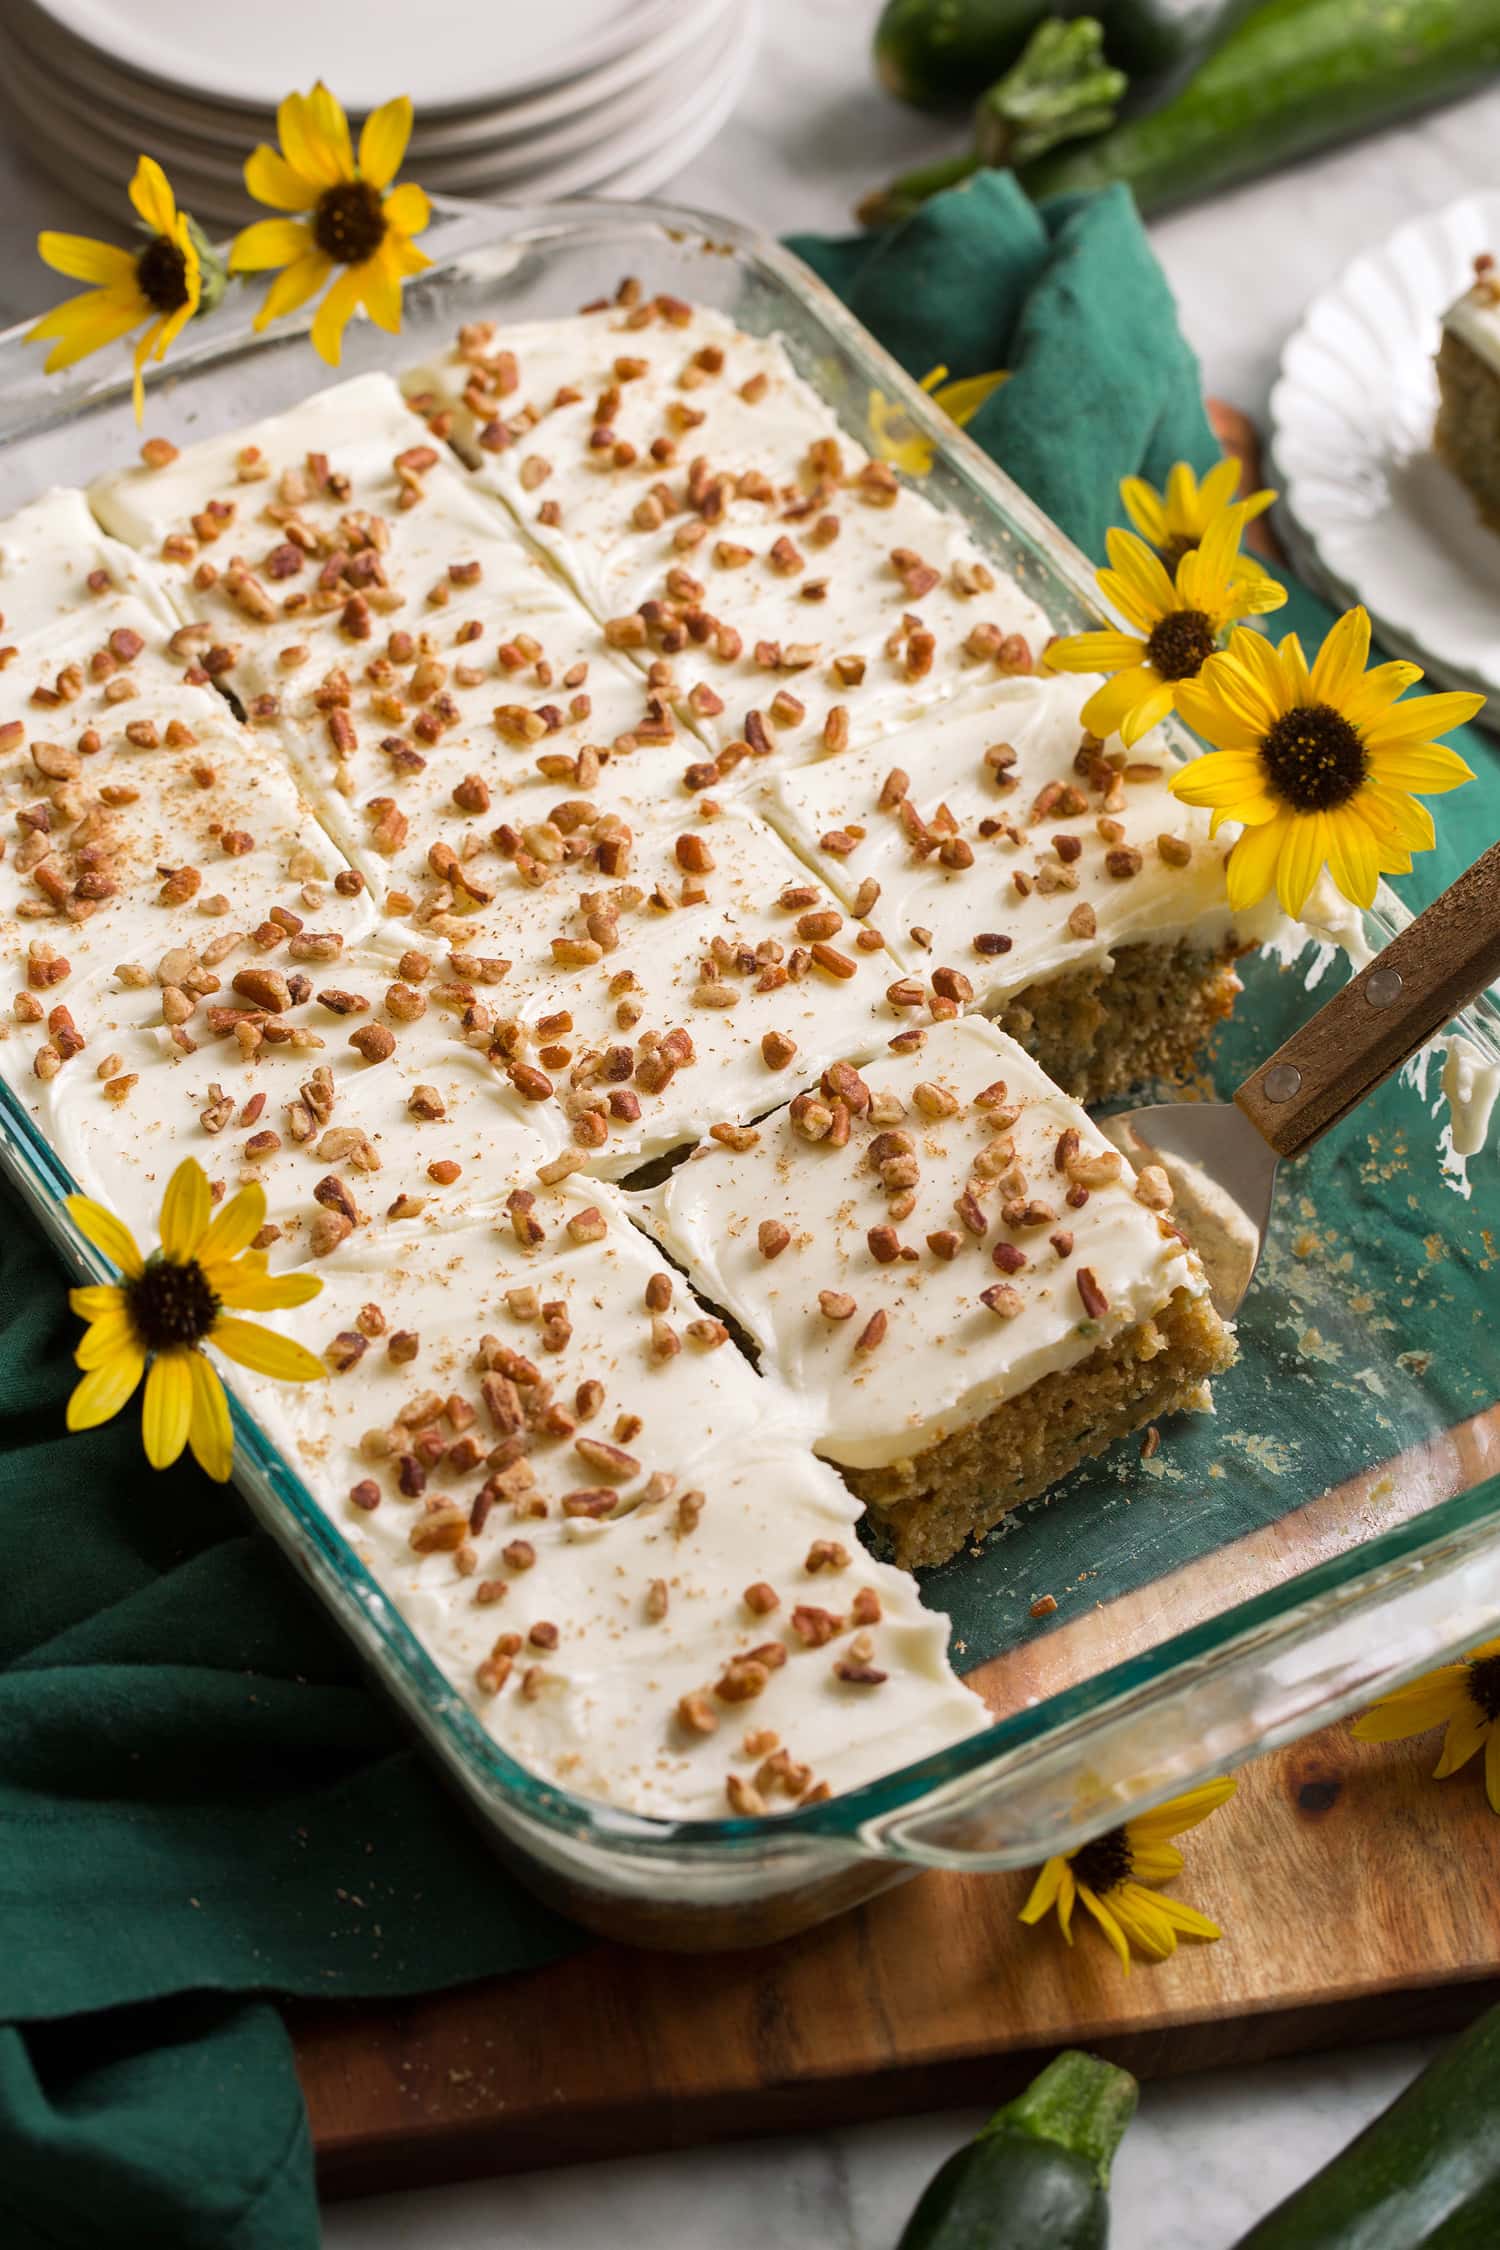 Glass baking pan with homemade zucchini cake topped with cream cheese frosting and chopped pecans.